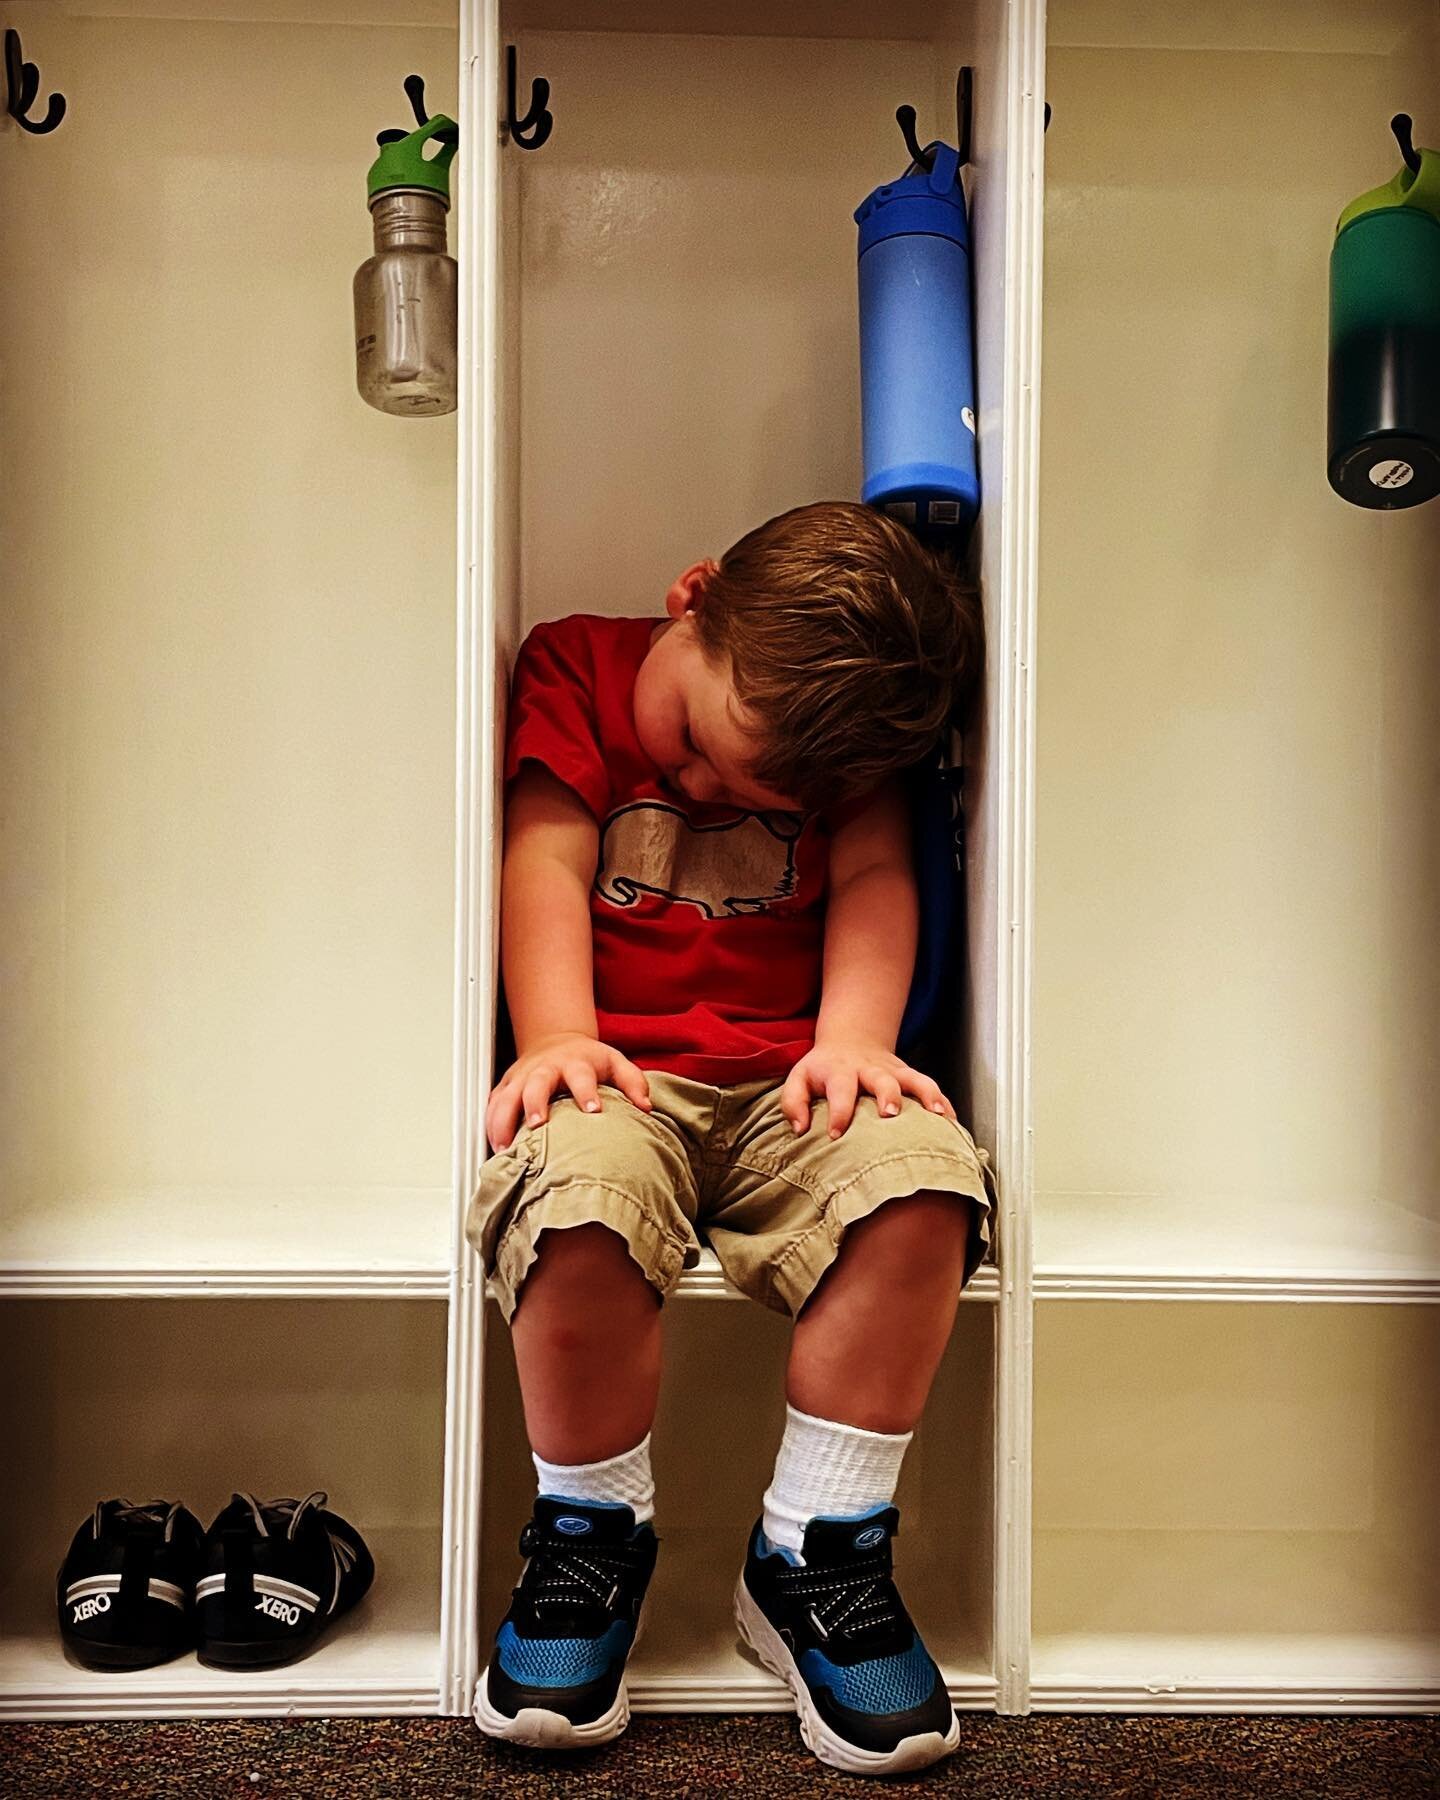 All of that work of the Absorbent Mind can be exhausting! #catholicmontessori